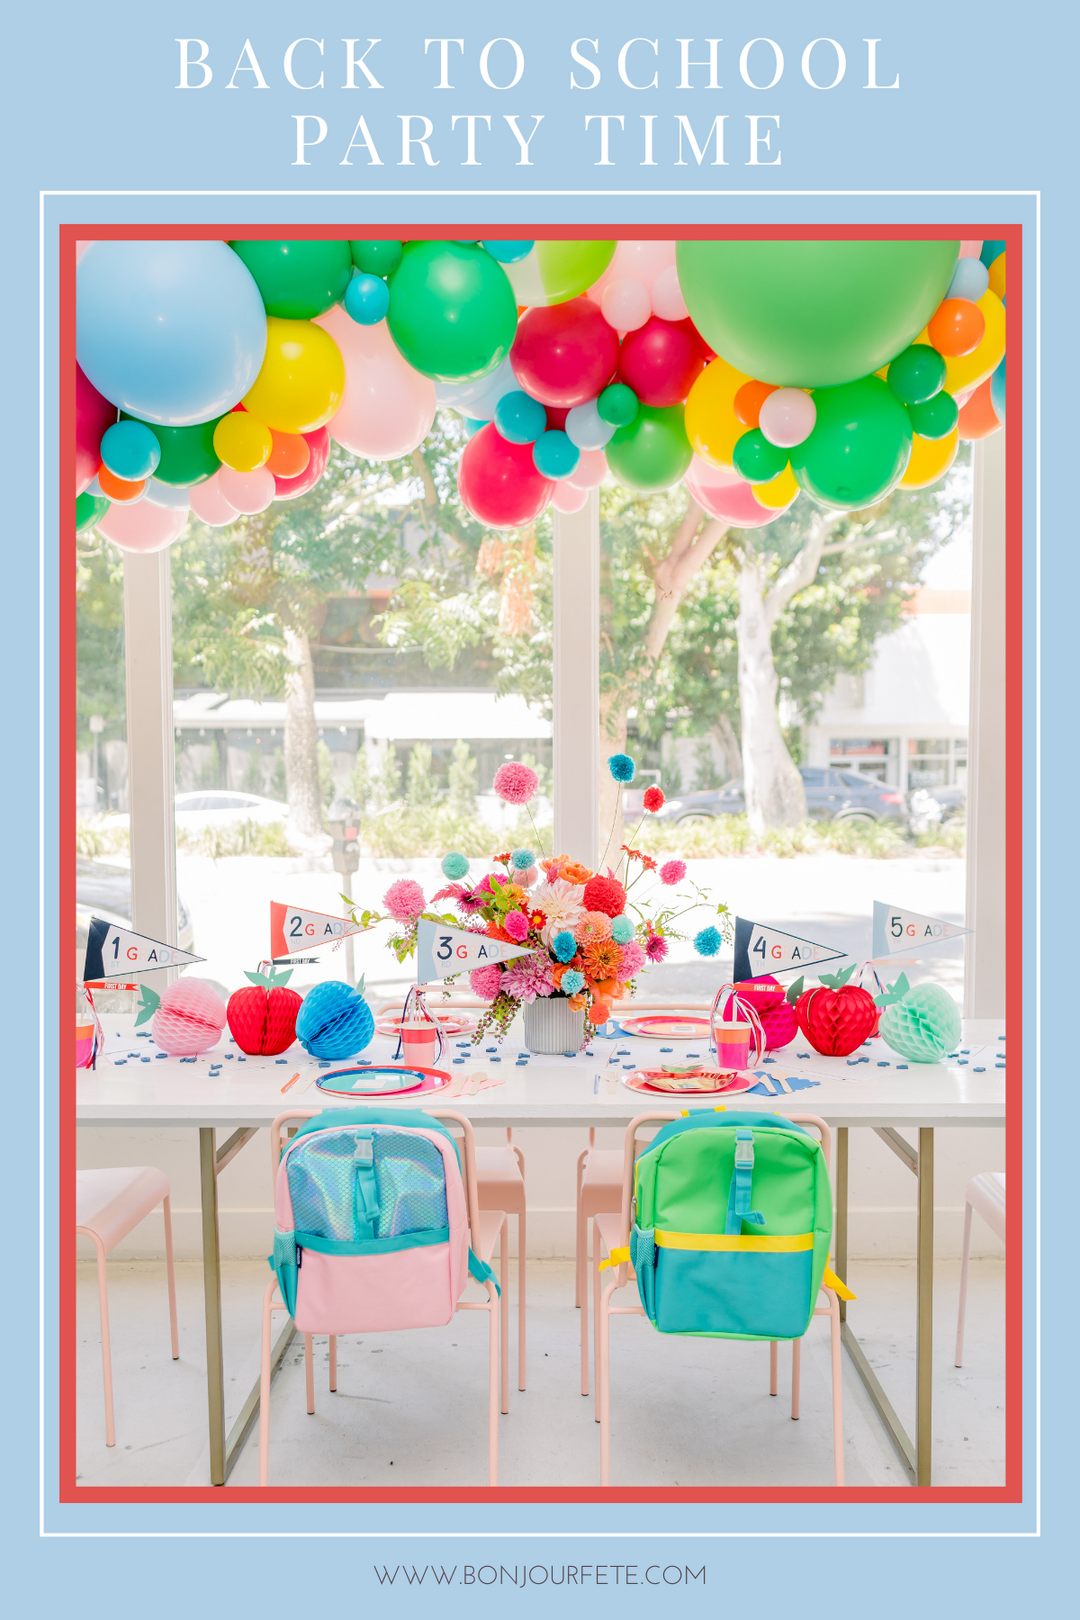 BACK TO SCHOOL PARTY IDEAS AND MUST-HAVE SCHOOL SUPPLIES